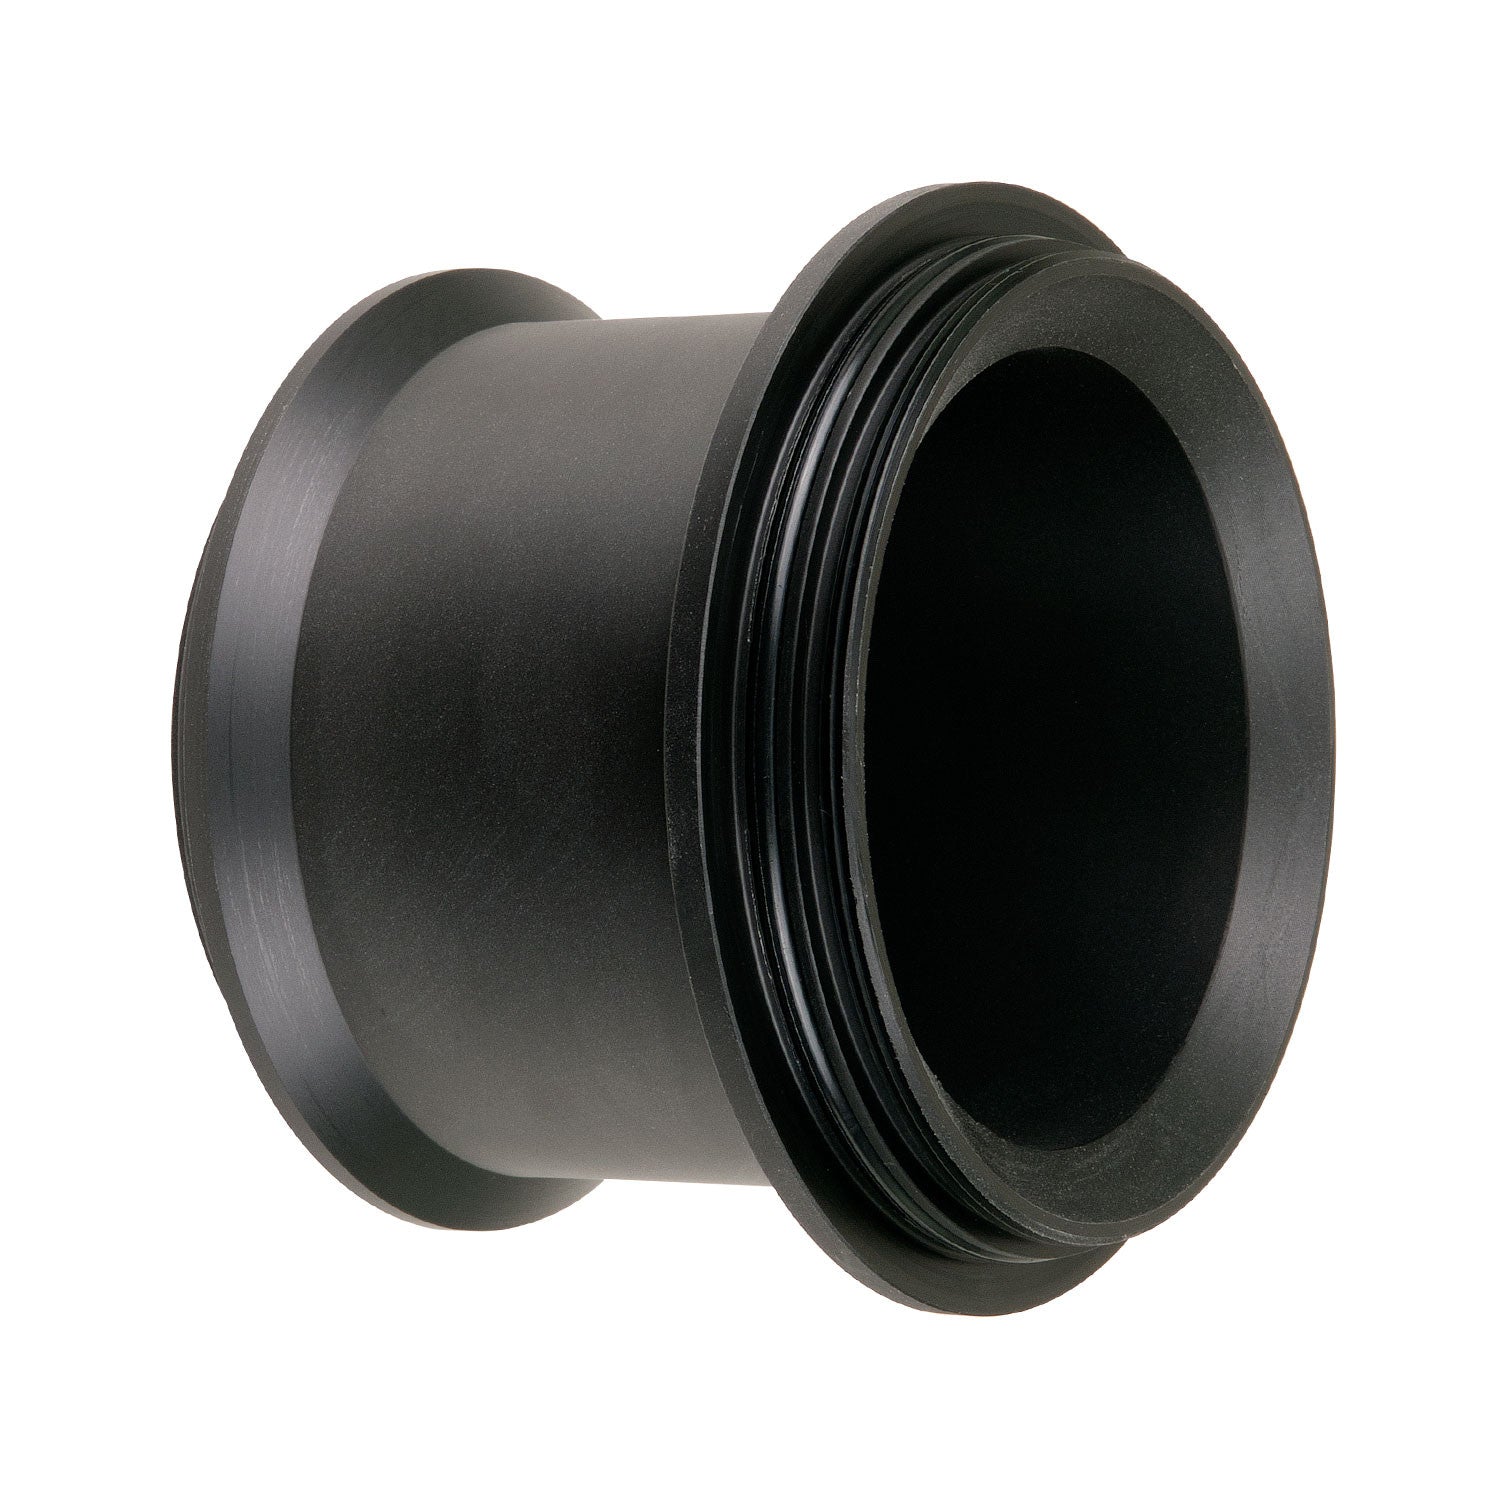 FL Extension for Lenses Up To 5.1 Inches